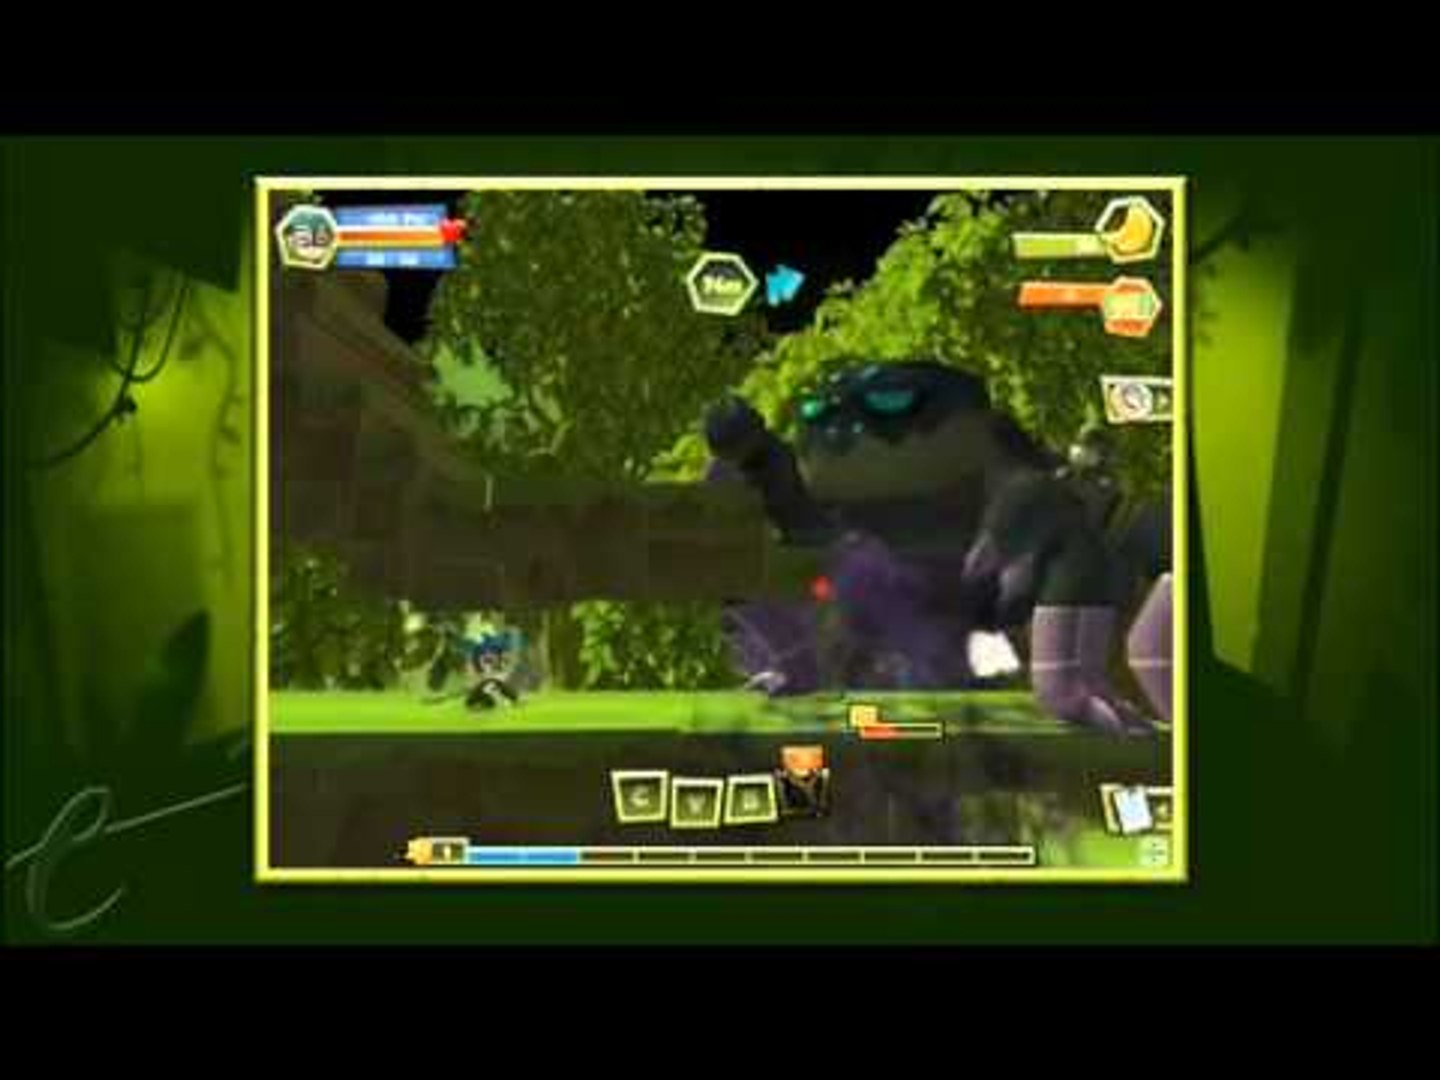 GDC 2011: Nickelodeon's Monkey Quest MMO